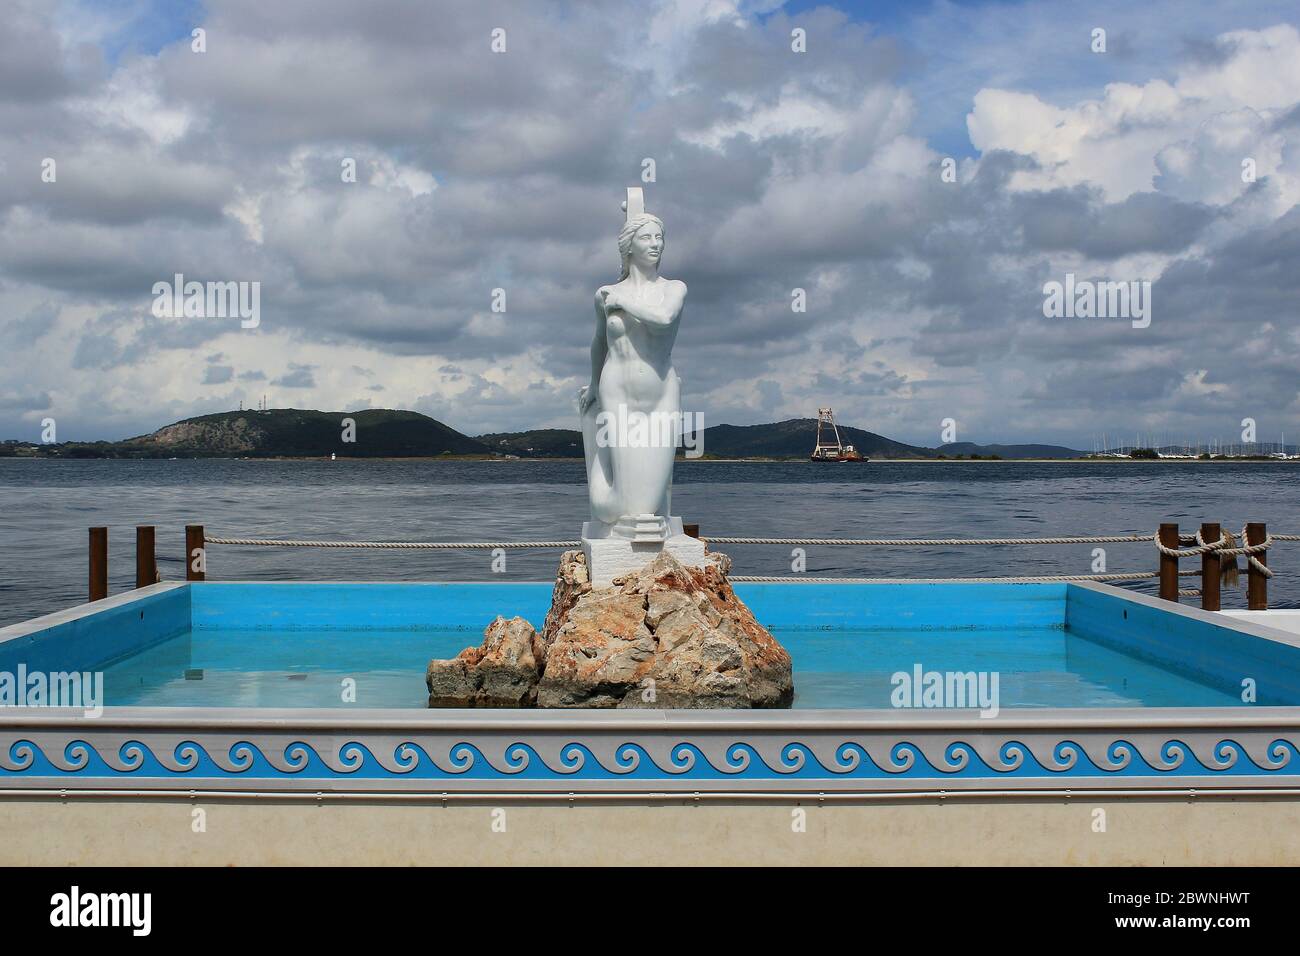 Preveza, Epirus / Greece - 05/21/2020: Mermaid sculpture in a fountain in port of Preveza town in Greece. View of the Ambracian gulf at the background Stock Photo